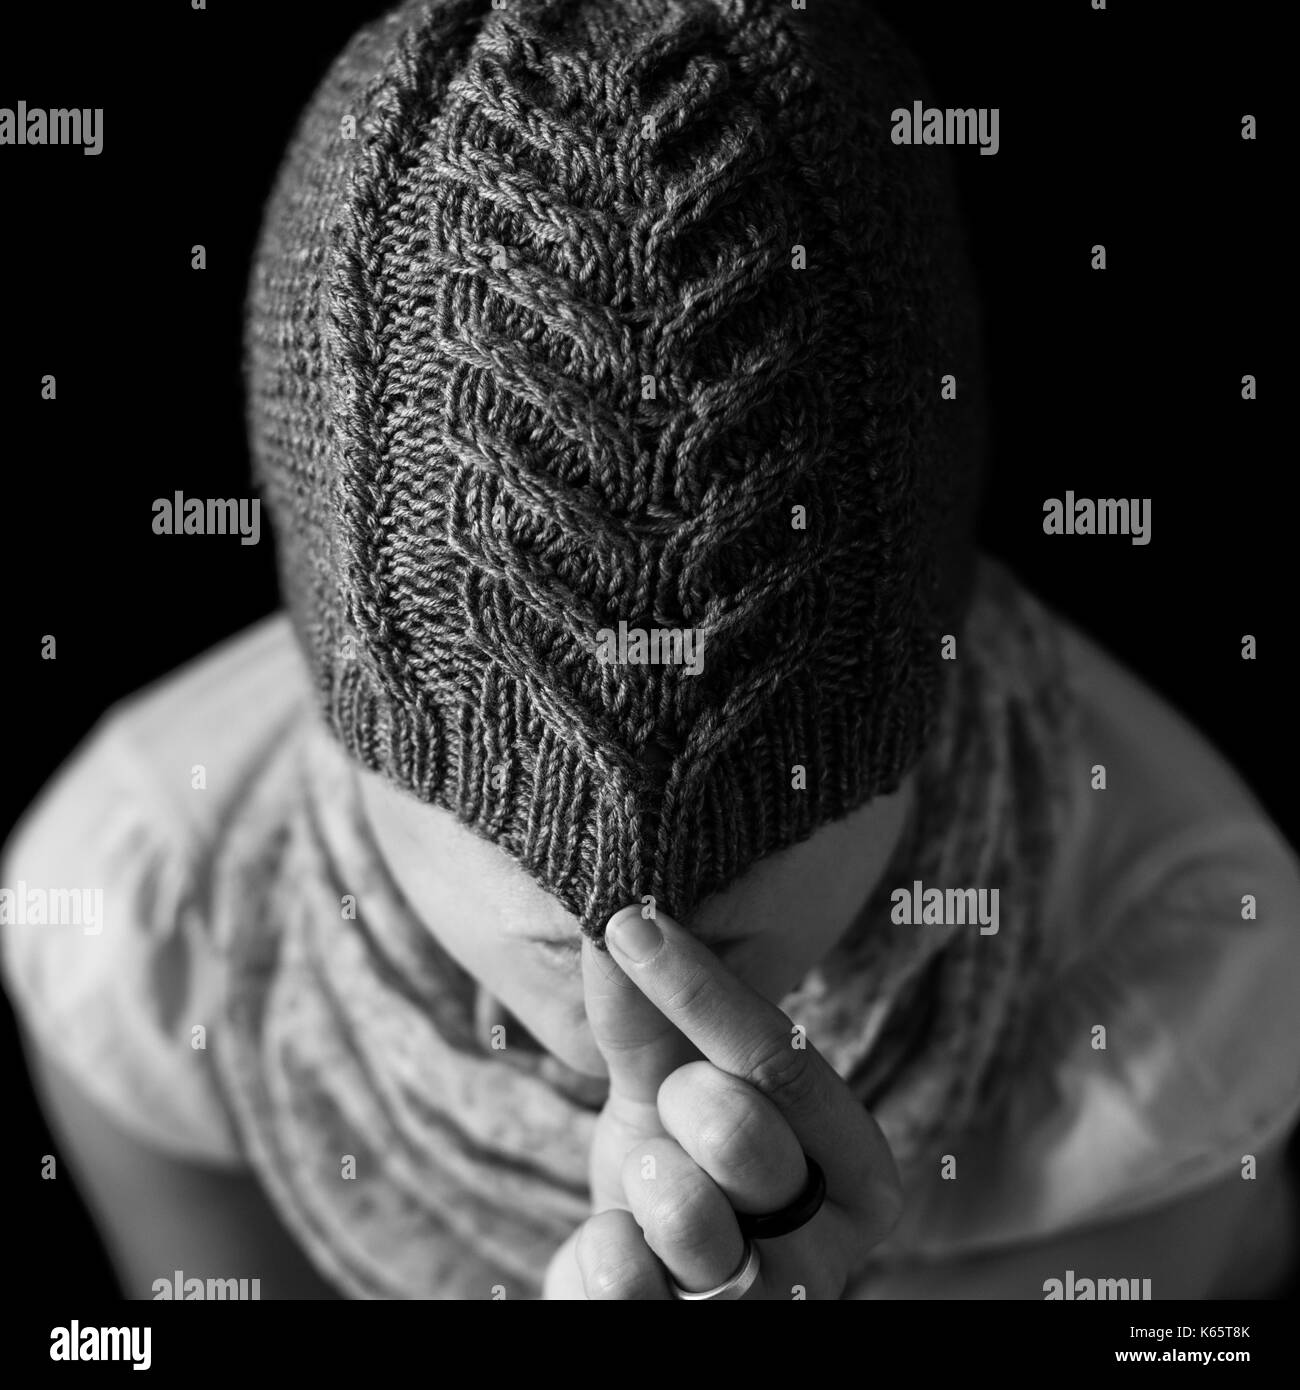 Woman with knitted woollen hat, portrait Stock Photo